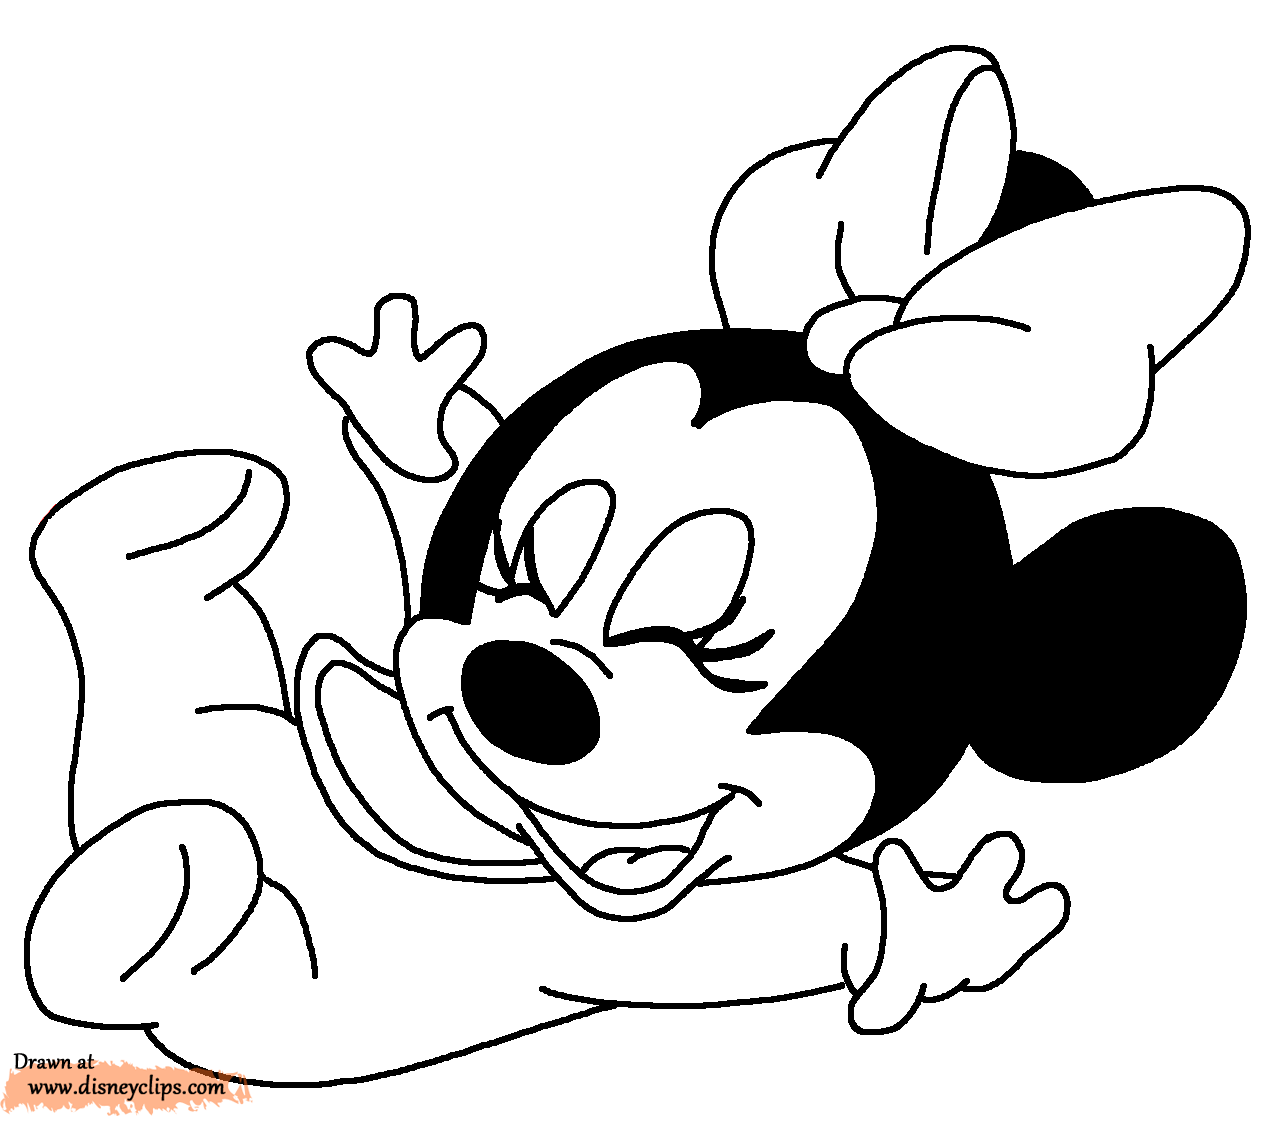 Free Printable Disney Baby Coloring Pages - High Quality Coloring